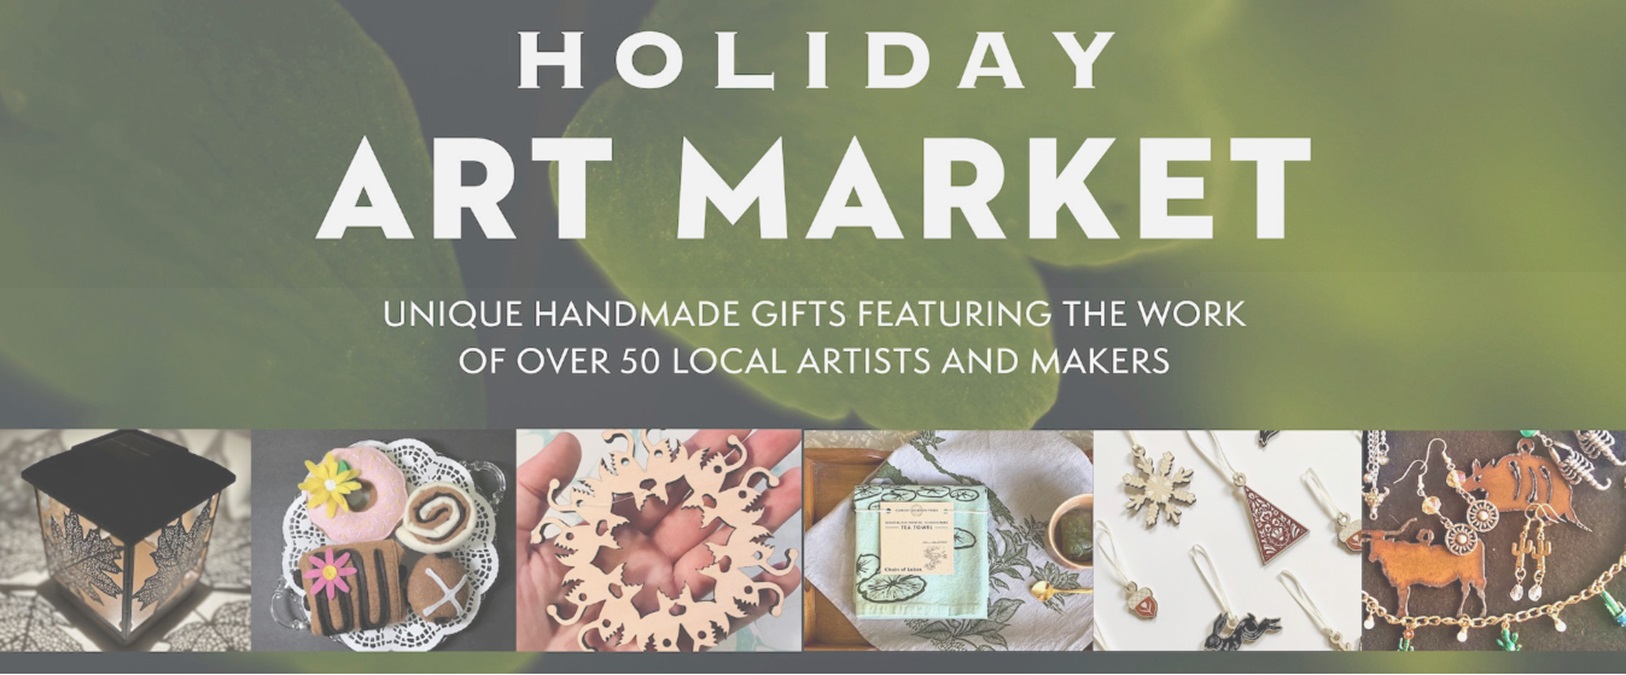 7th Annual Holiday Art Market at the Brushwood Center